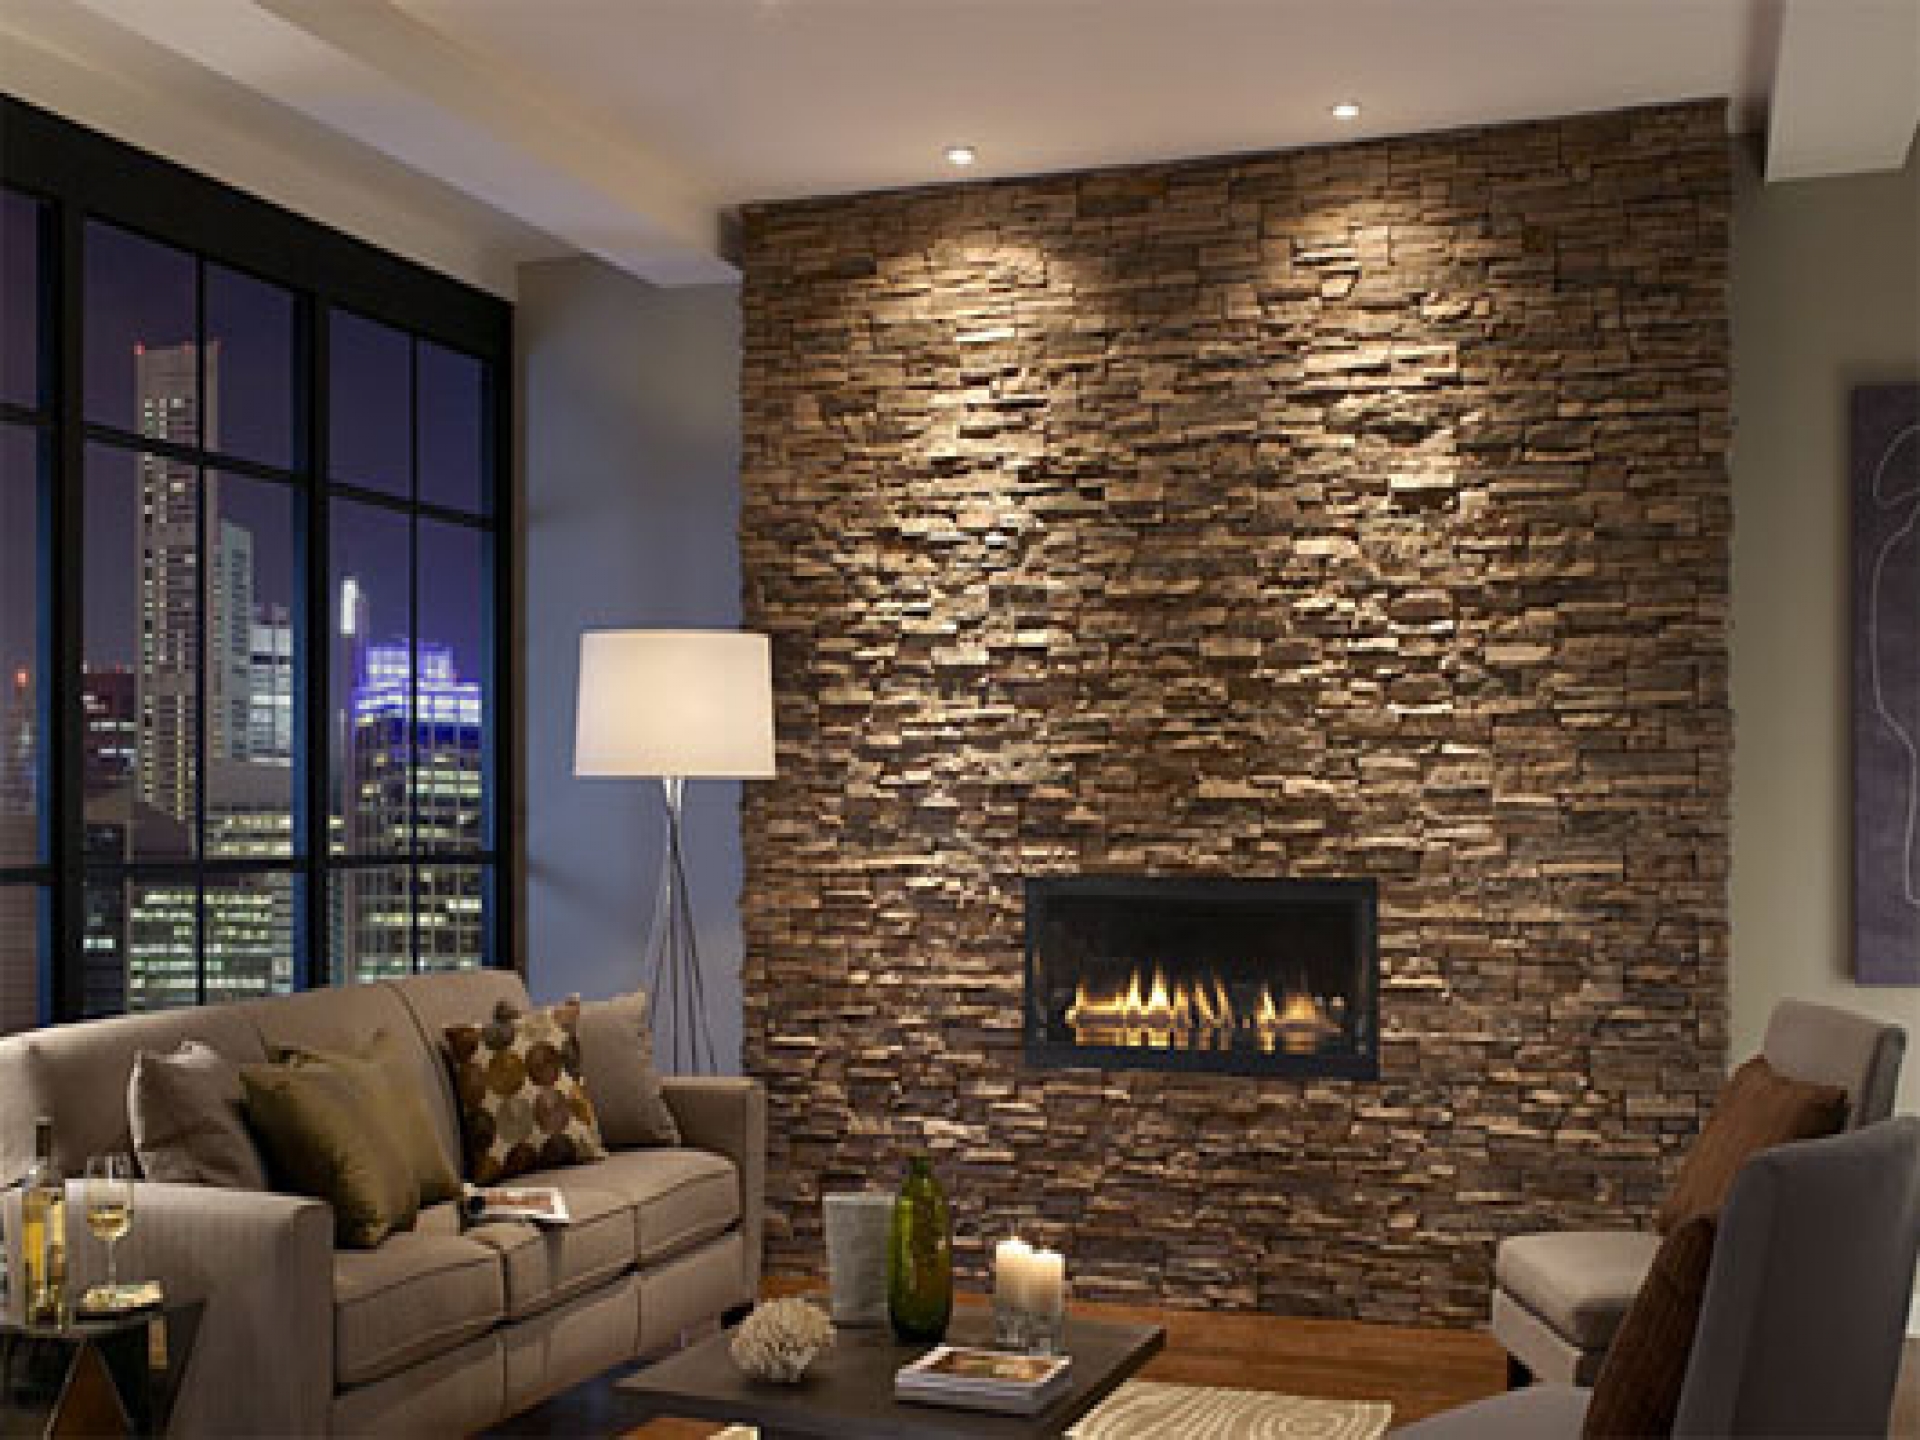 15 Living Room Stone Wall Design Images